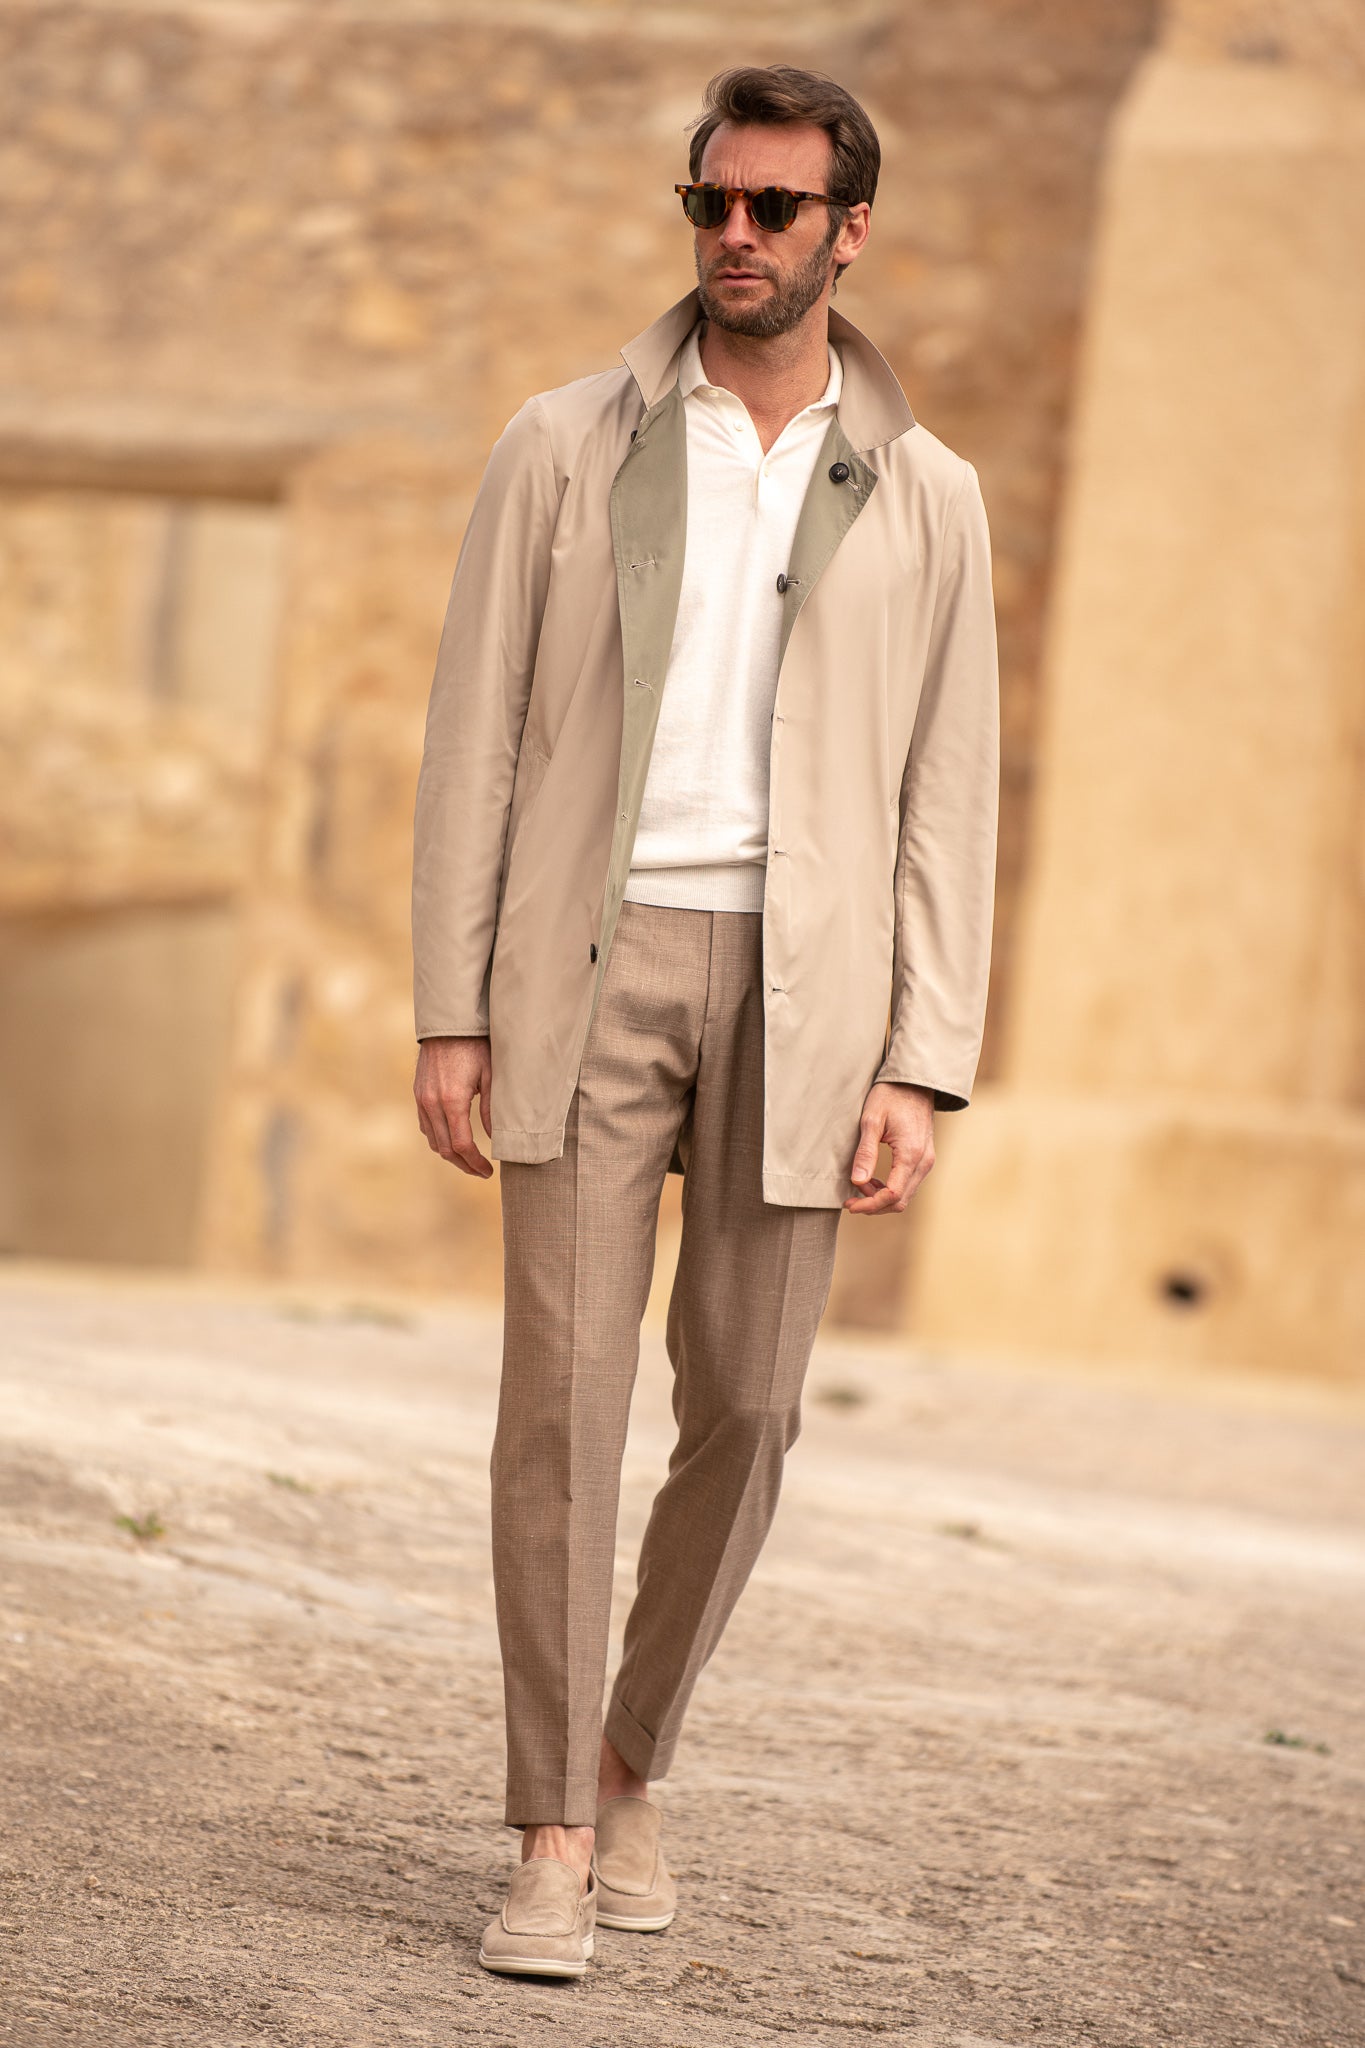  Men wool trousers, almond  trousers, summer wool trousers, men light brown trousers, high rise italian trousers, italian almond trousers, Pantalon en laine pour homme, pantalon en amande, pantalon en laine pour l'été, pantalon marron clair pour homme, pantalon italien à taille haute, pantalon italien en amande, Pantaloni uomo in lana, pantaloni a mandorla, pantaloni estivi in lana, pantaloni uomo marrone chiaro, pantaloni italiani a vita alta, pantaloni italiani a mandorla,